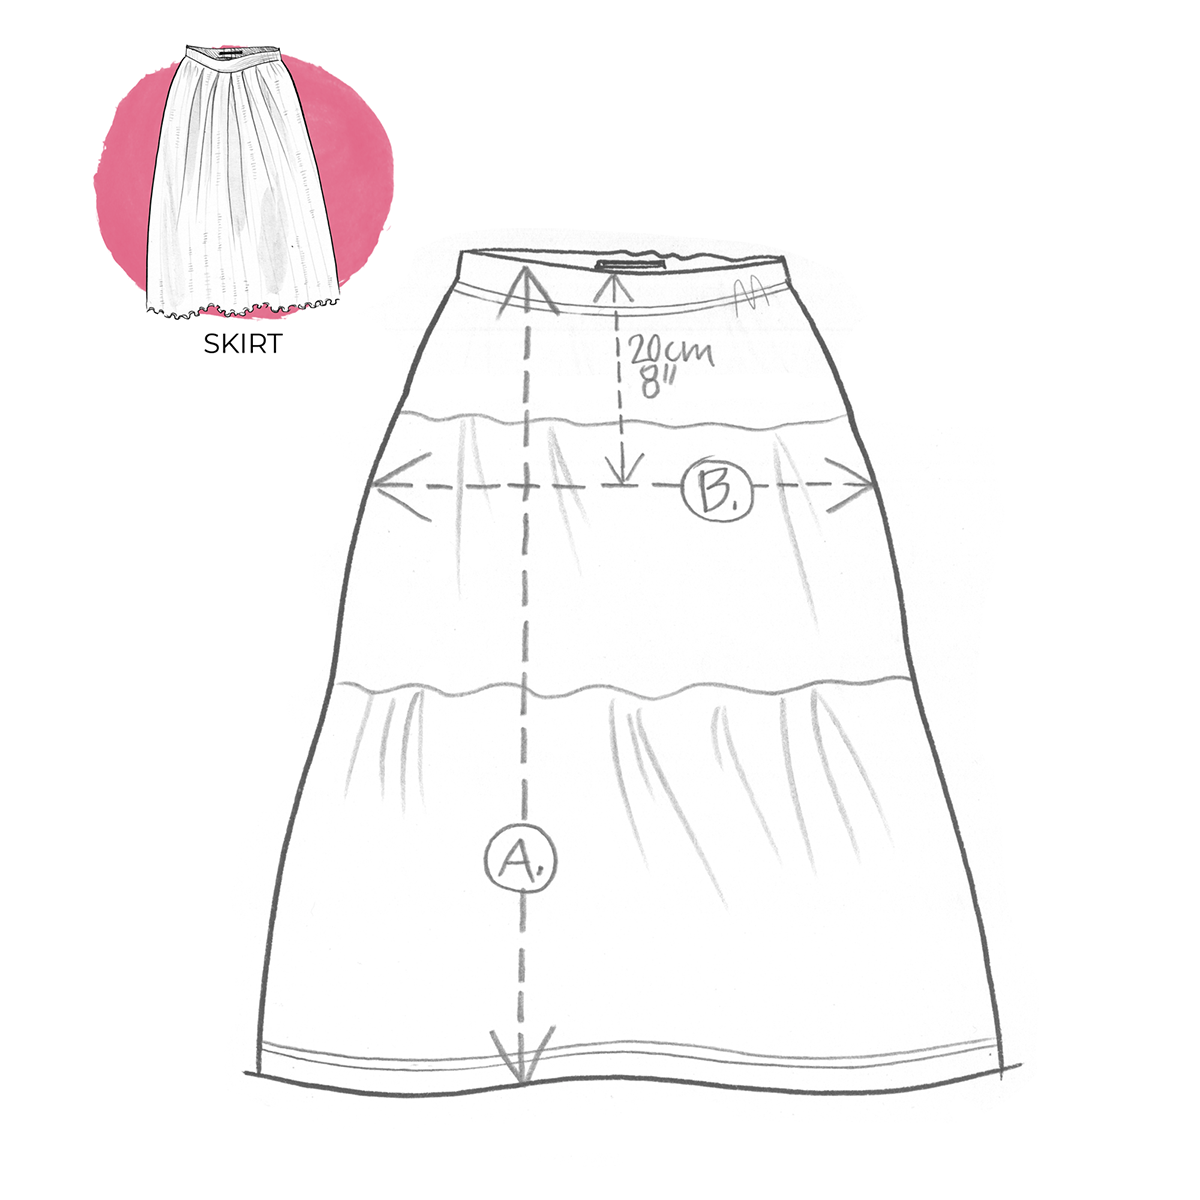 measurment guide_icon_illustration_Skirt.png